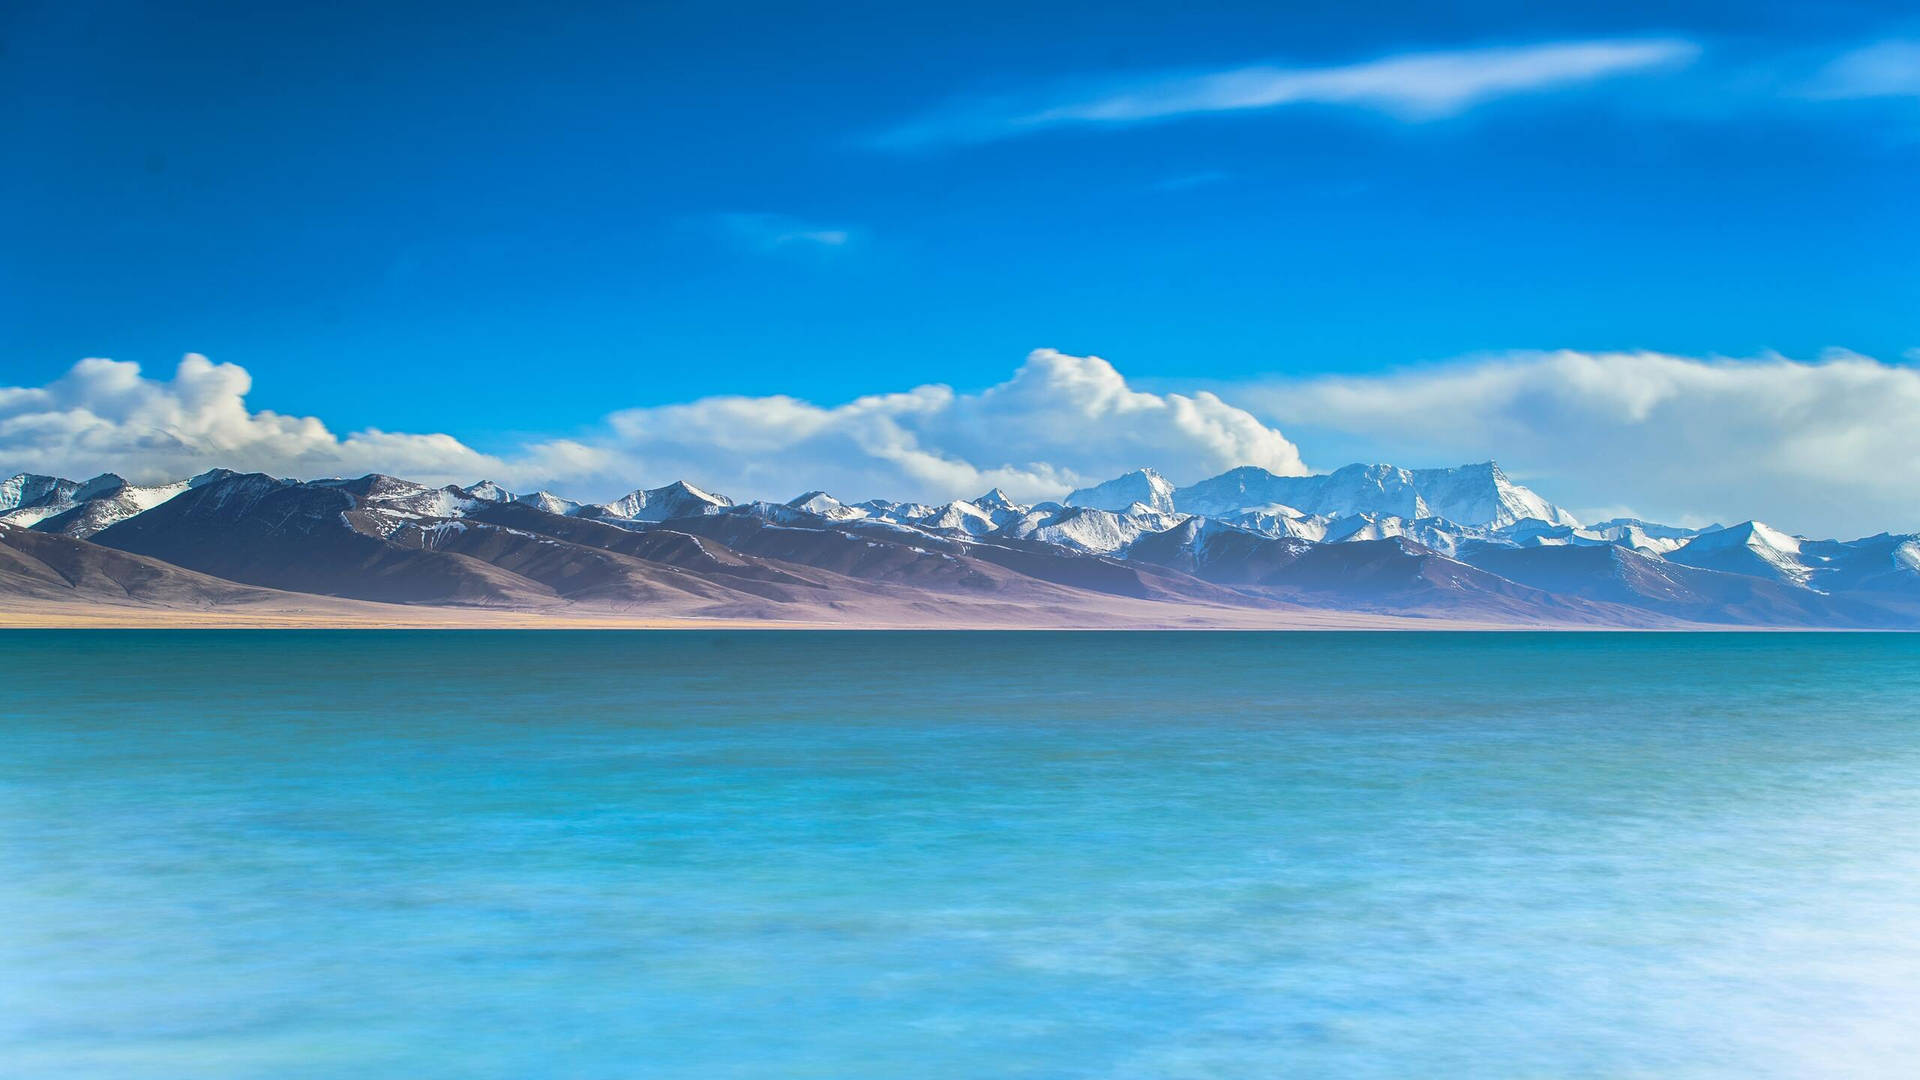 2560 X 1440 Mountain Range By The Sea Background